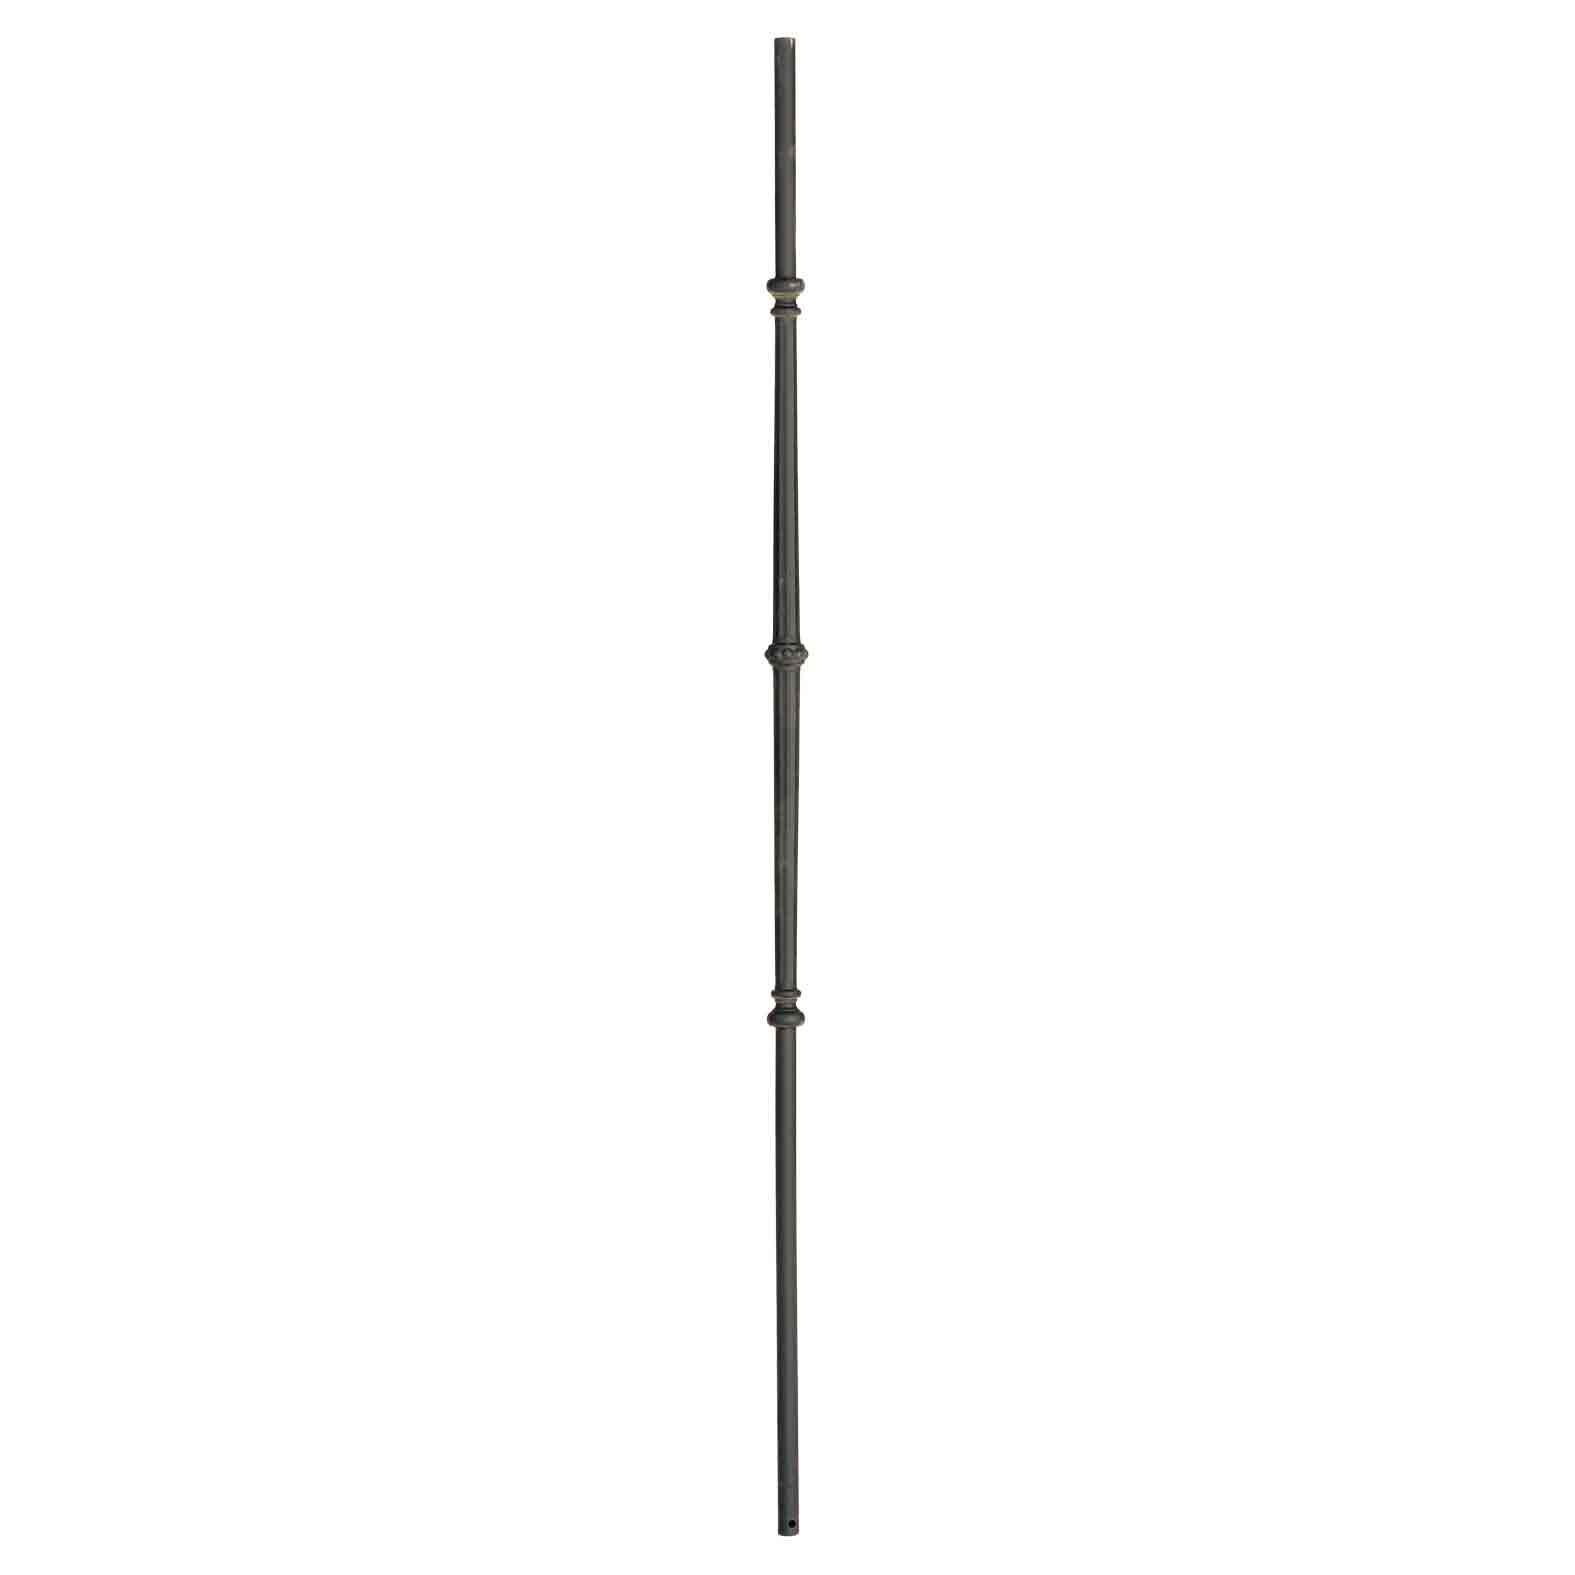 lih-HOL65344 fluted bar baluster with knuckles